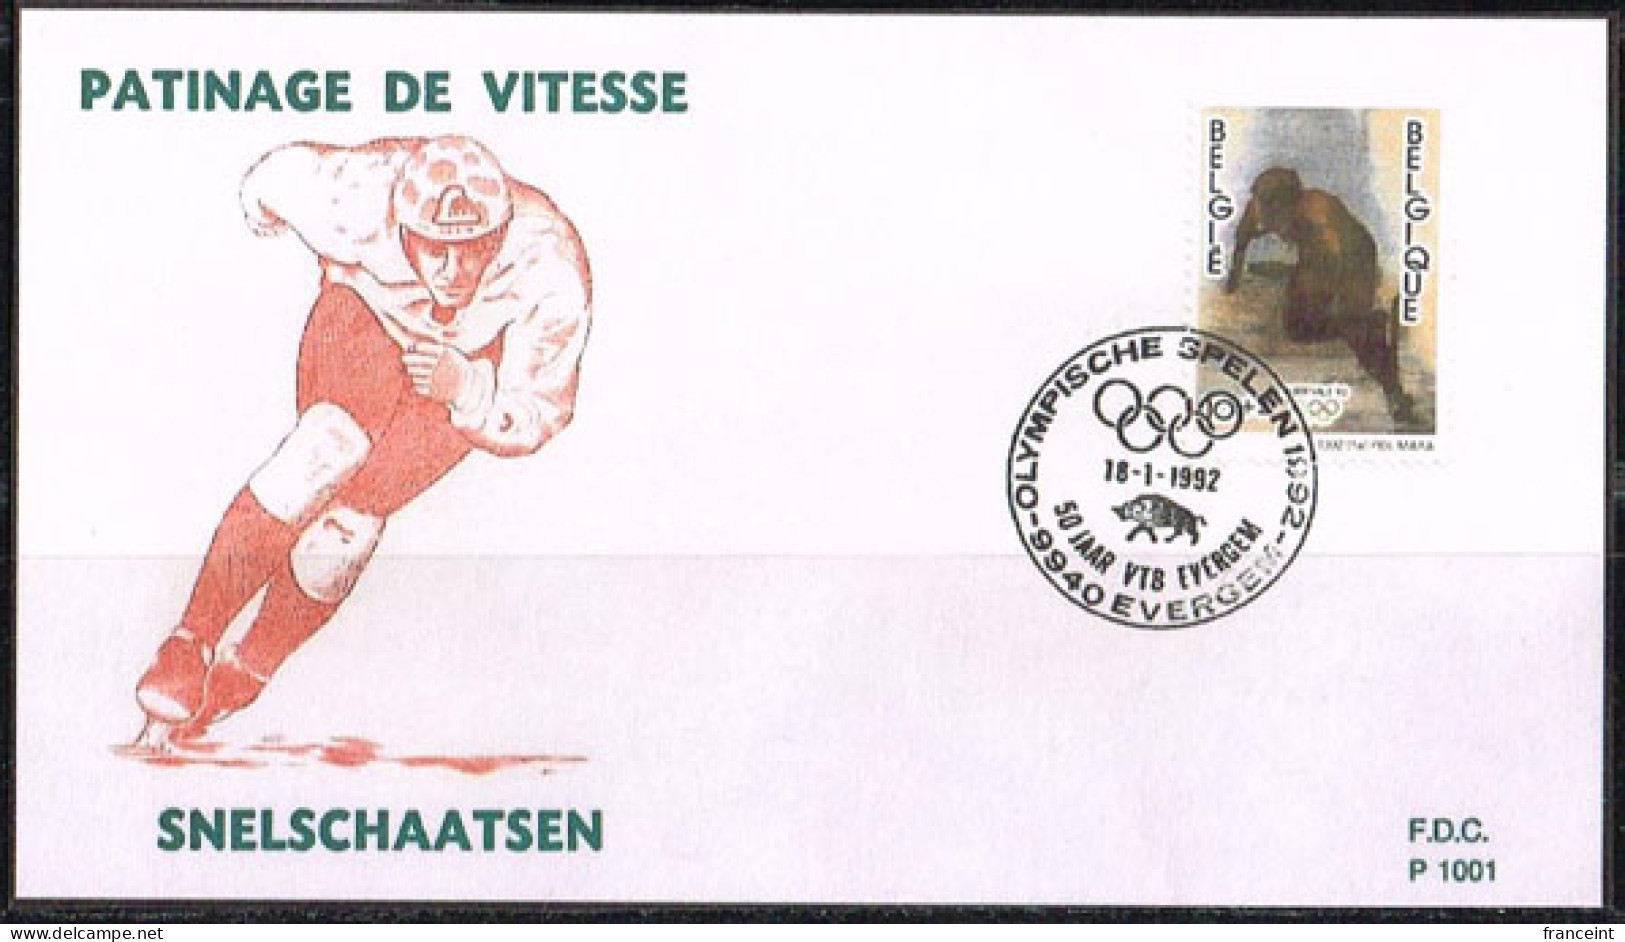 BELGIUM(1992) Speed Skating. Die Proof In Black Signed By The Engraver, Representing The FDC Cachet. Scott No B1101. - Essais & Réimpressions